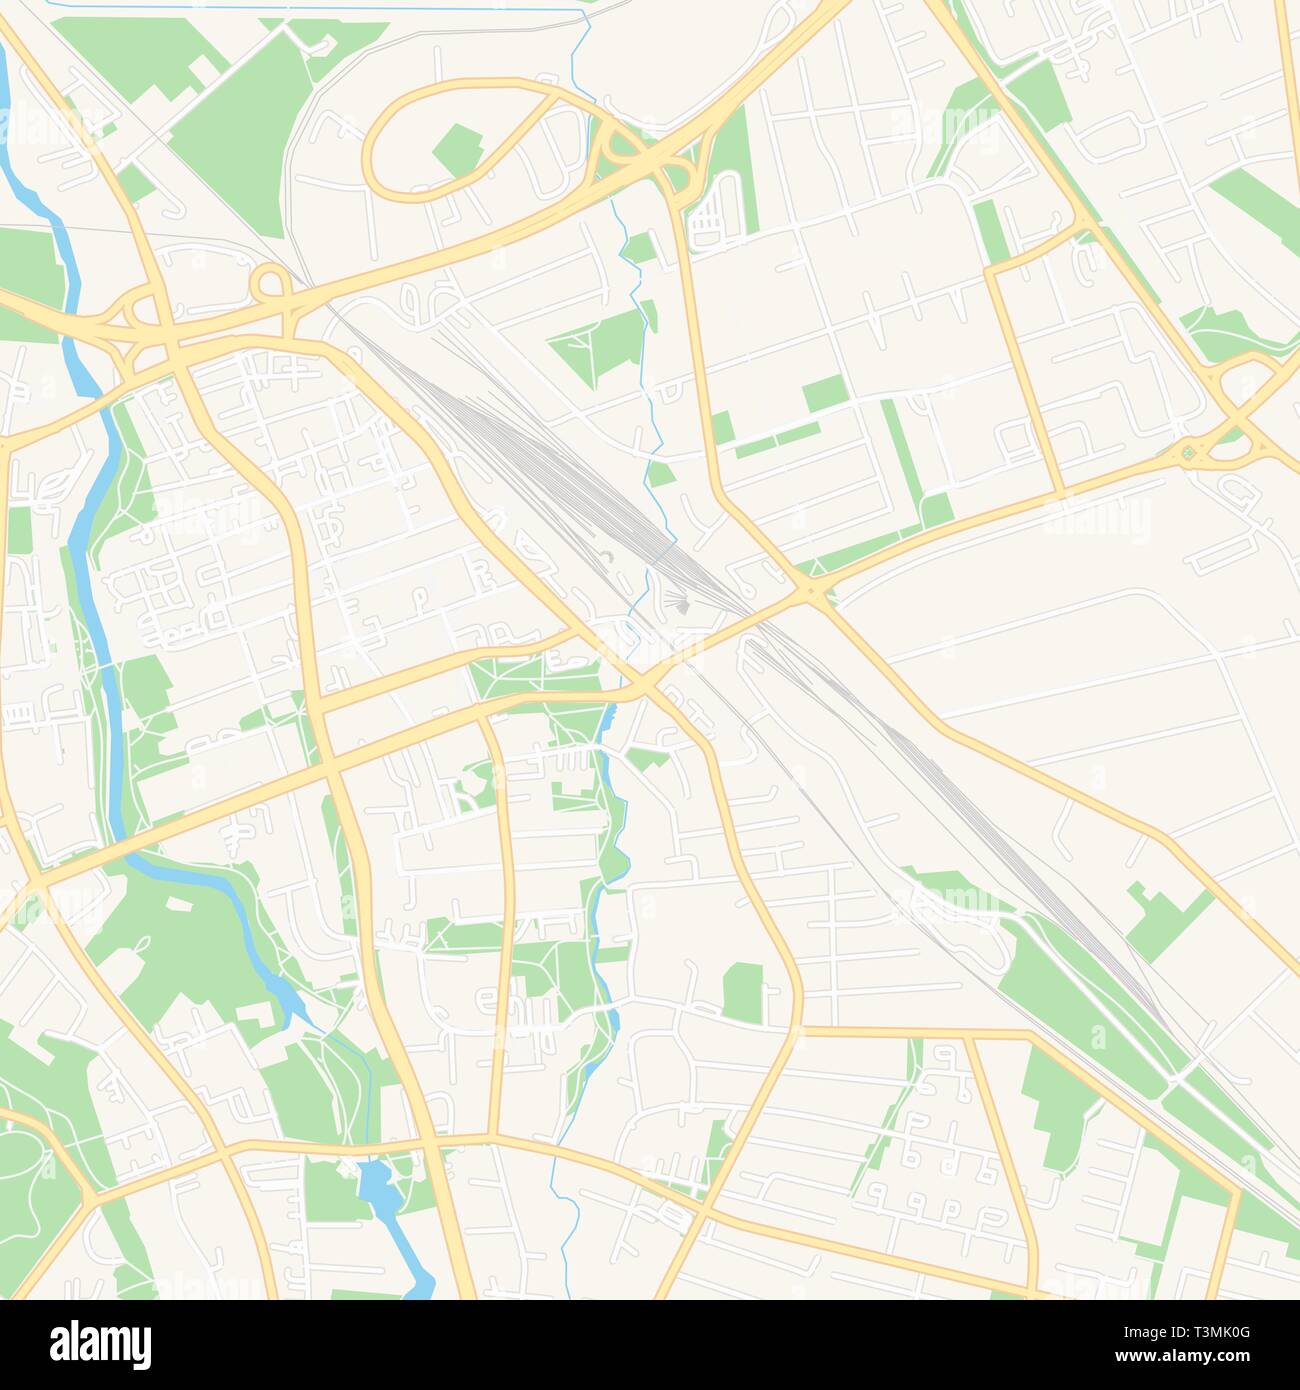 Printable map of Seinajoki, Finland with main and secondary roads and larger railways. This map is carefully designed for routing and placing individu Stock Vector